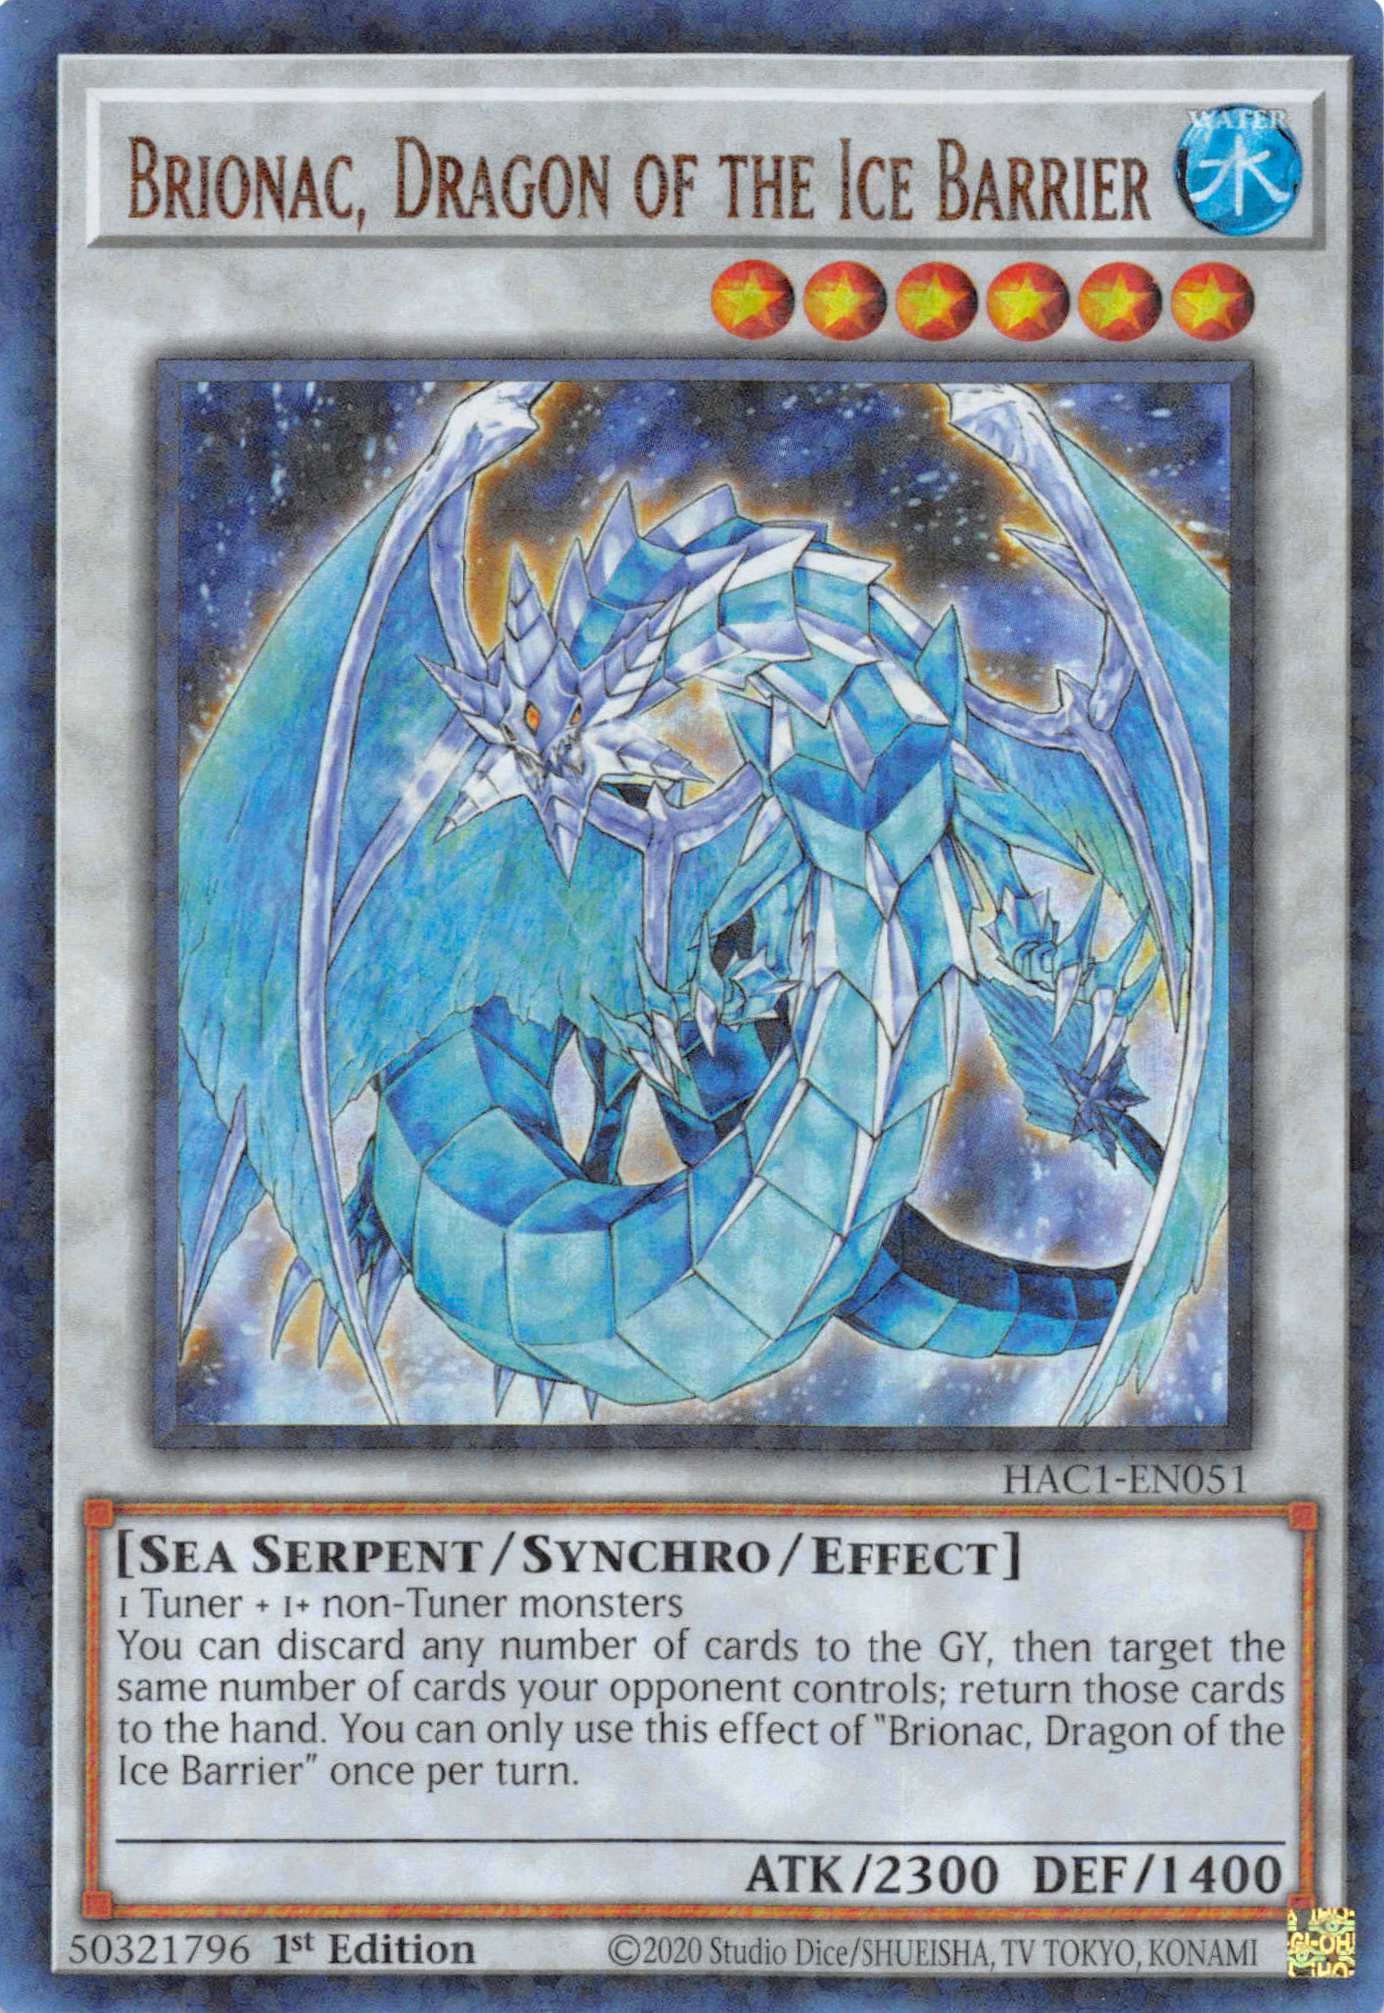 Brionac, Dragon of the Ice Barrier (Duel Terminal) [HAC1-EN051] Parallel Rare | Gamers Paradise